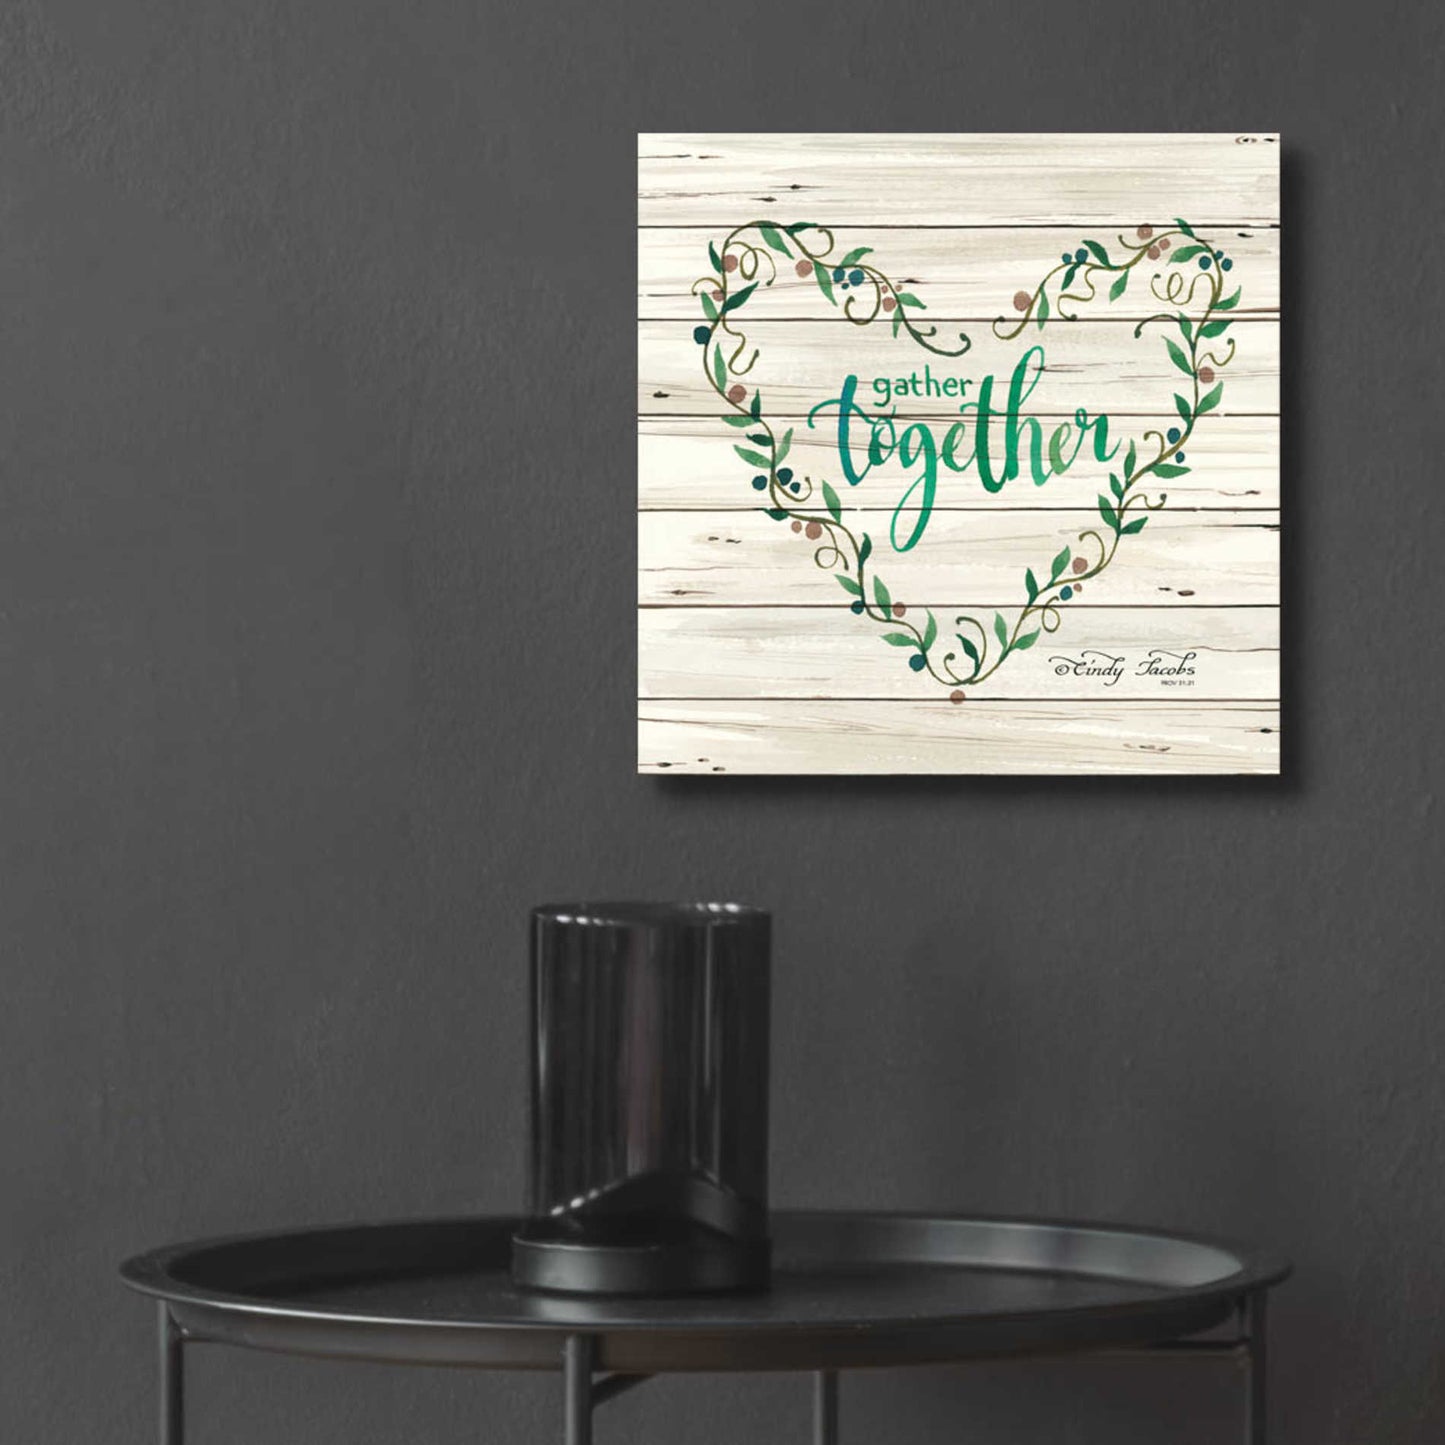 Epic Art 'Gather Together Heart Wreath' by Cindy Jacobs, Acrylic Glass Wall Art,12x12